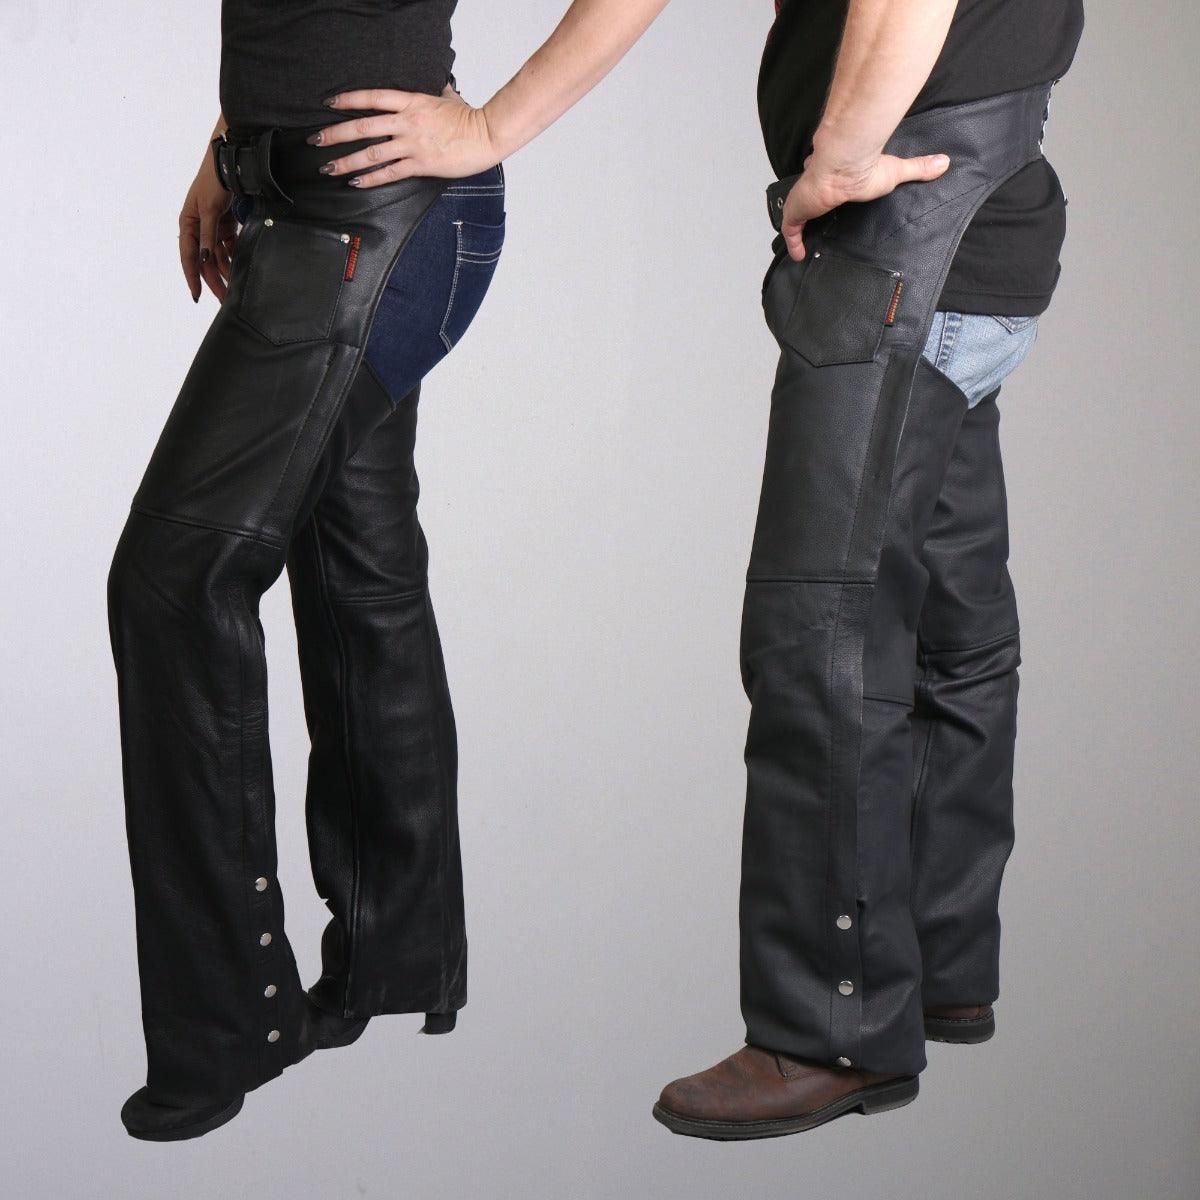 Hot Leathers Unisex Classic Style Leather Chaps - American Legend Rider